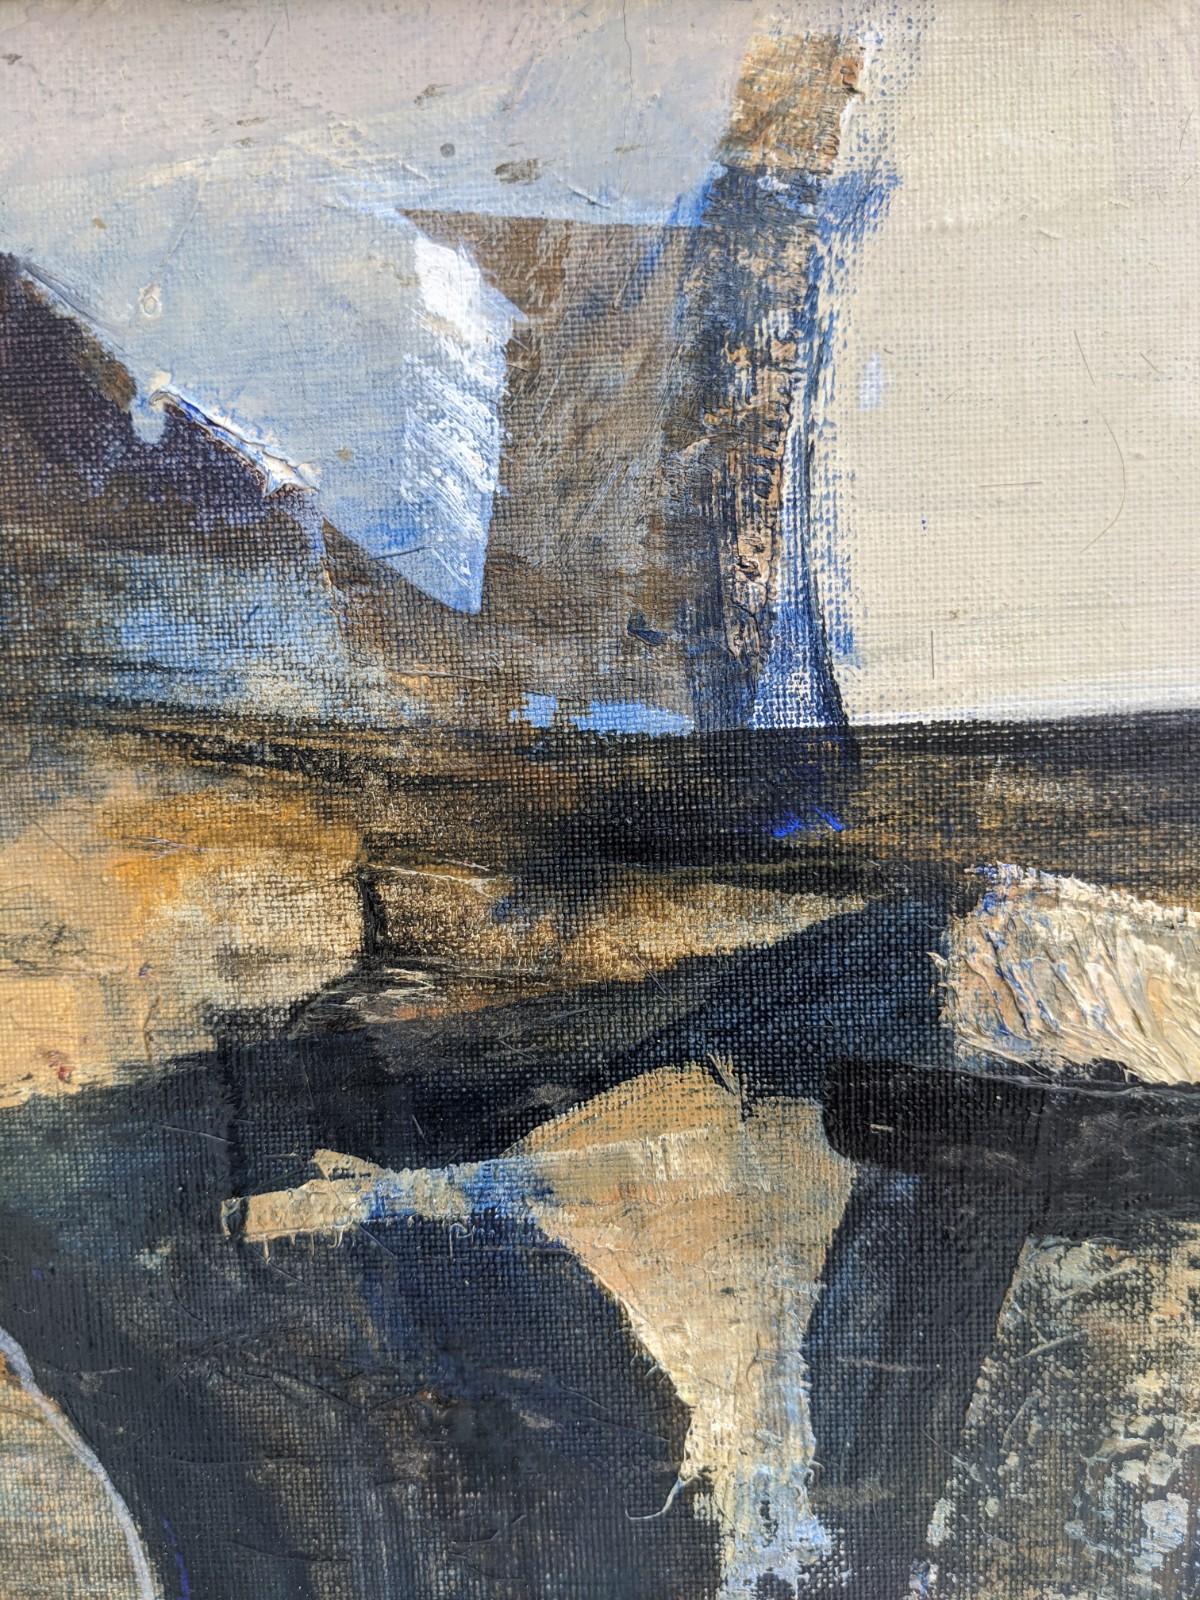 BLACK & BLUE
Size: 24 x 46 cm (including frame)
Oil on board

A deep and soulful abstract composition rendered in oil. Swathes of colour in varying forms tease our imagination – do we see something recognisable? Angled forms peek out in different